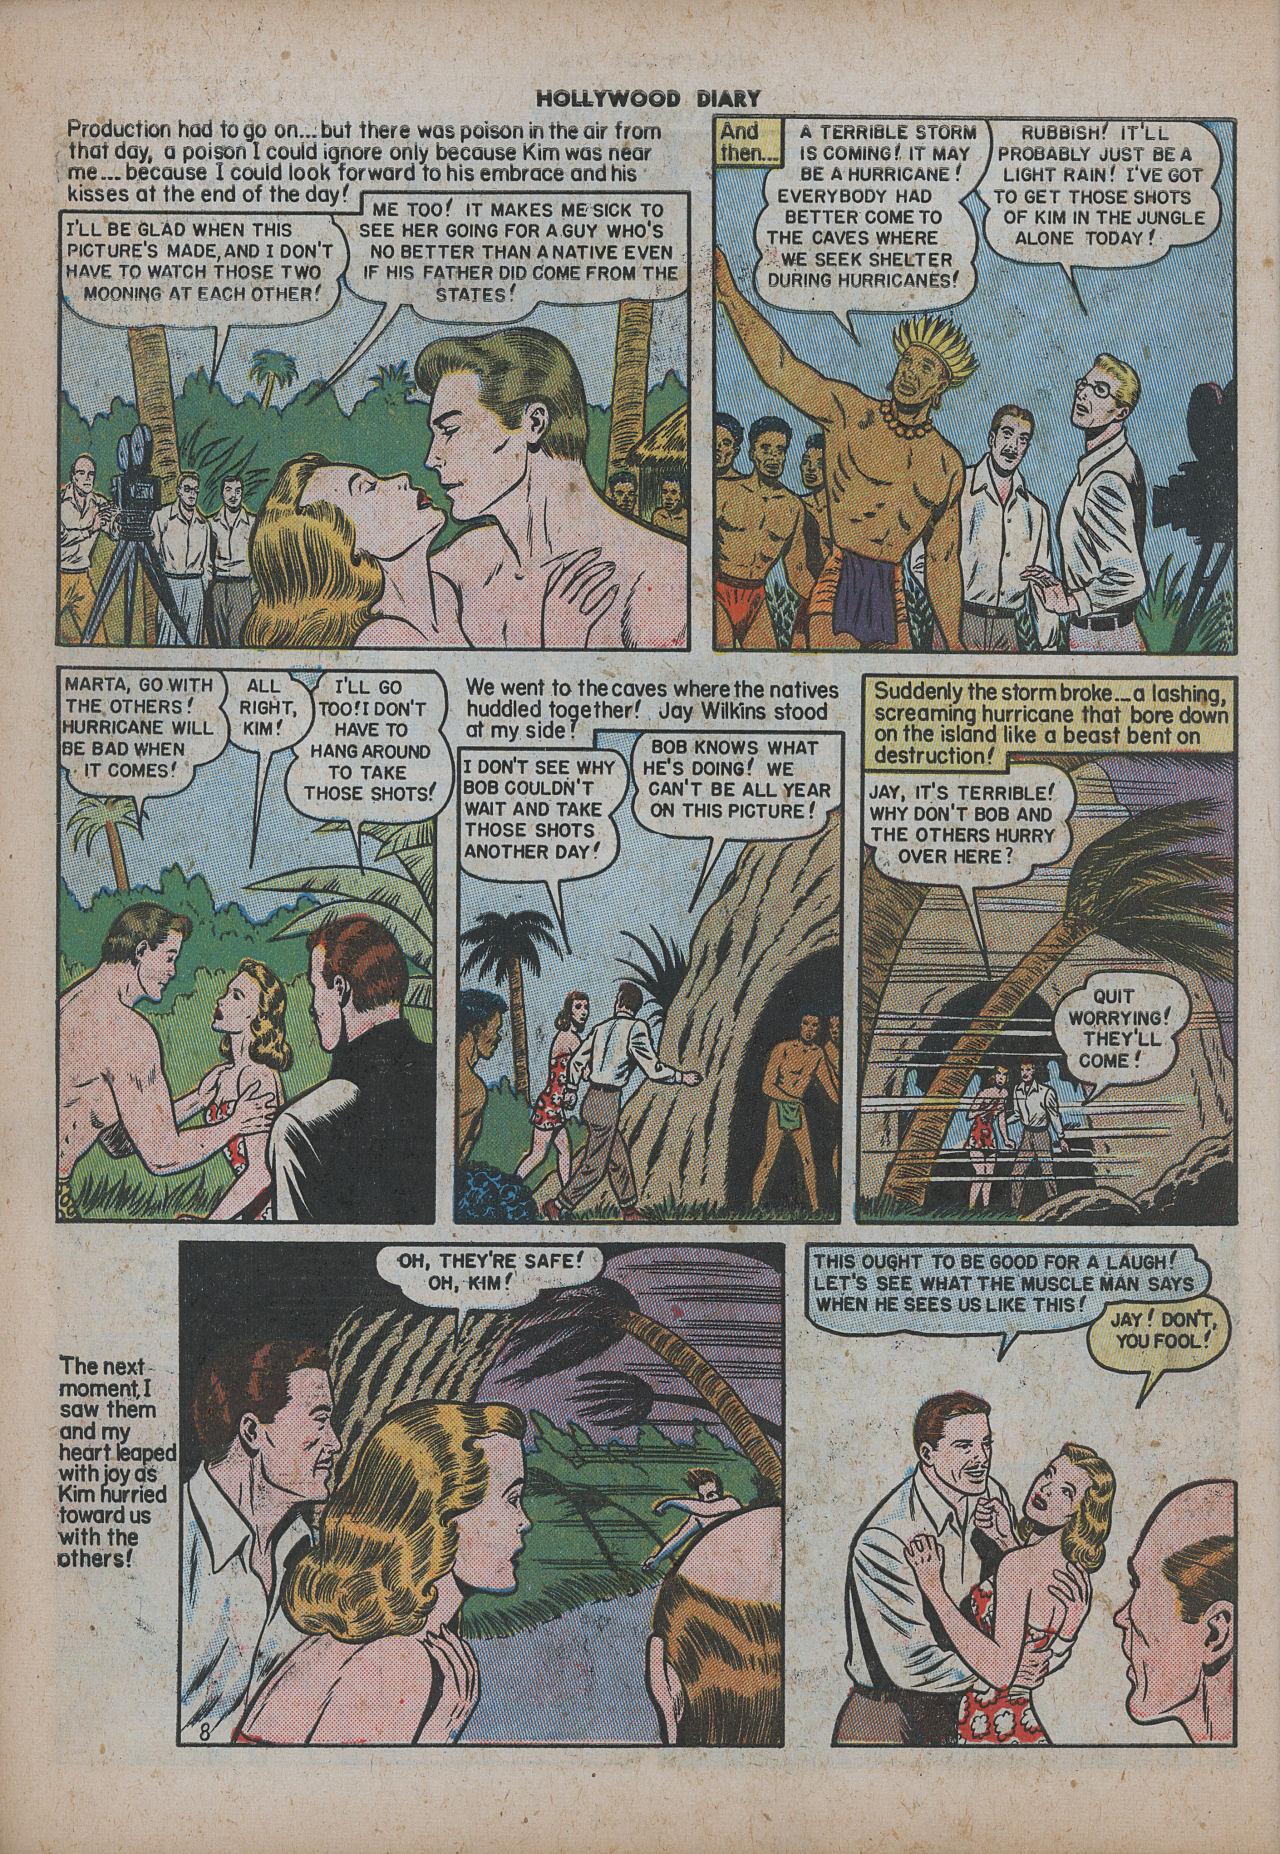 Read online Hollywood Diary comic -  Issue #4 - 10